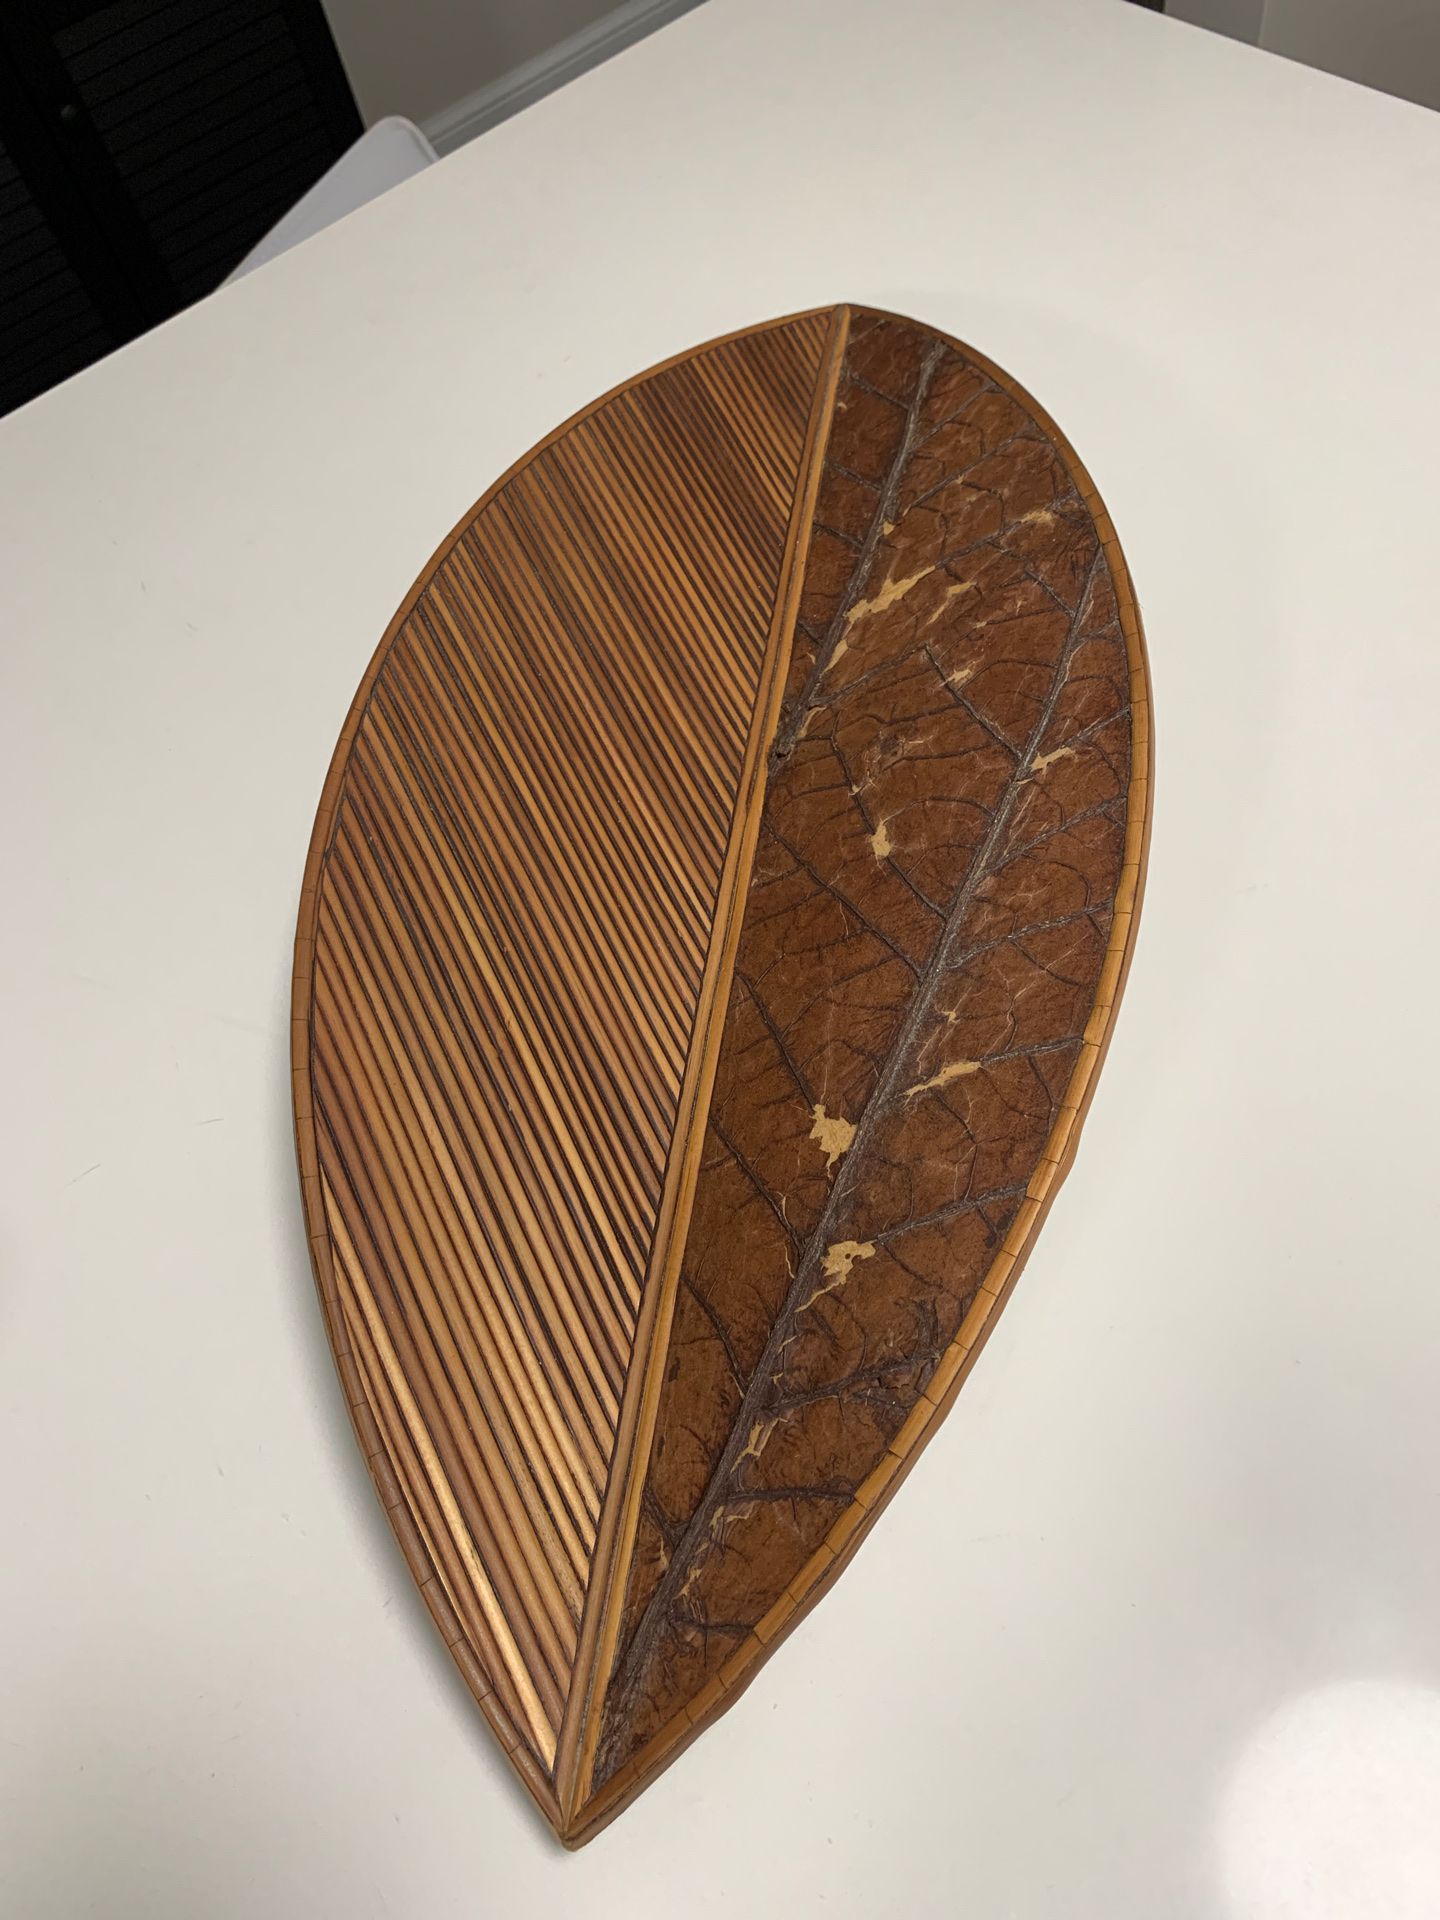 Accent tray made from trees and leaves in Philippines